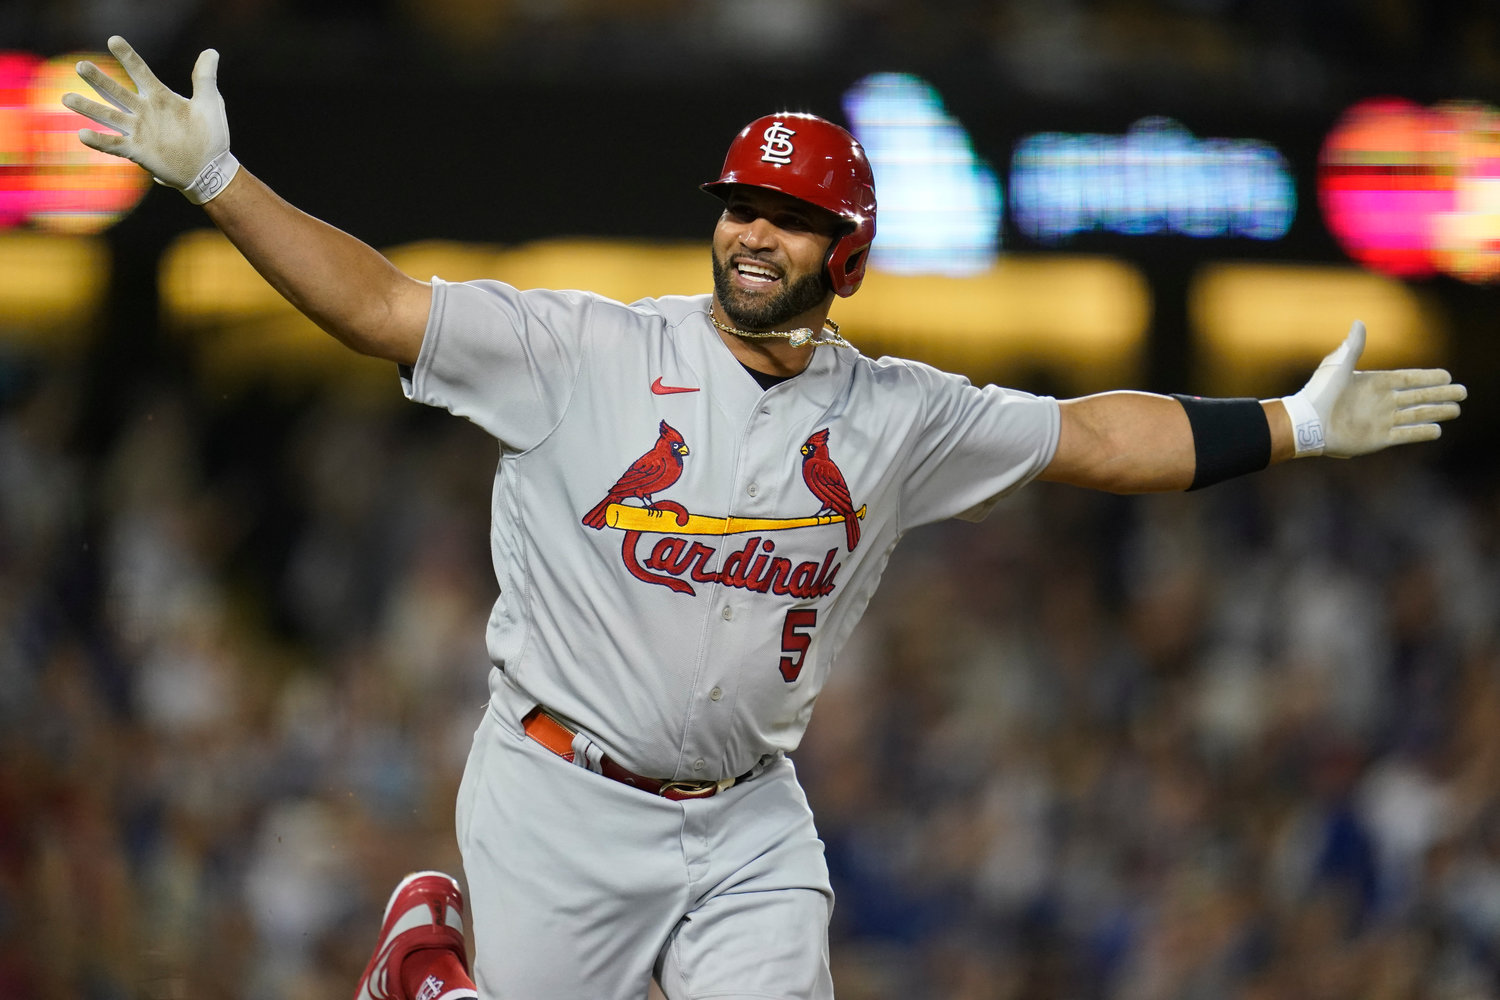 St. Louis Cardinals designated hitter Albert Pujols reacts after hitting his 700th home run on Sept. 23. Pujols won the National League Comeback Player of the Year award.